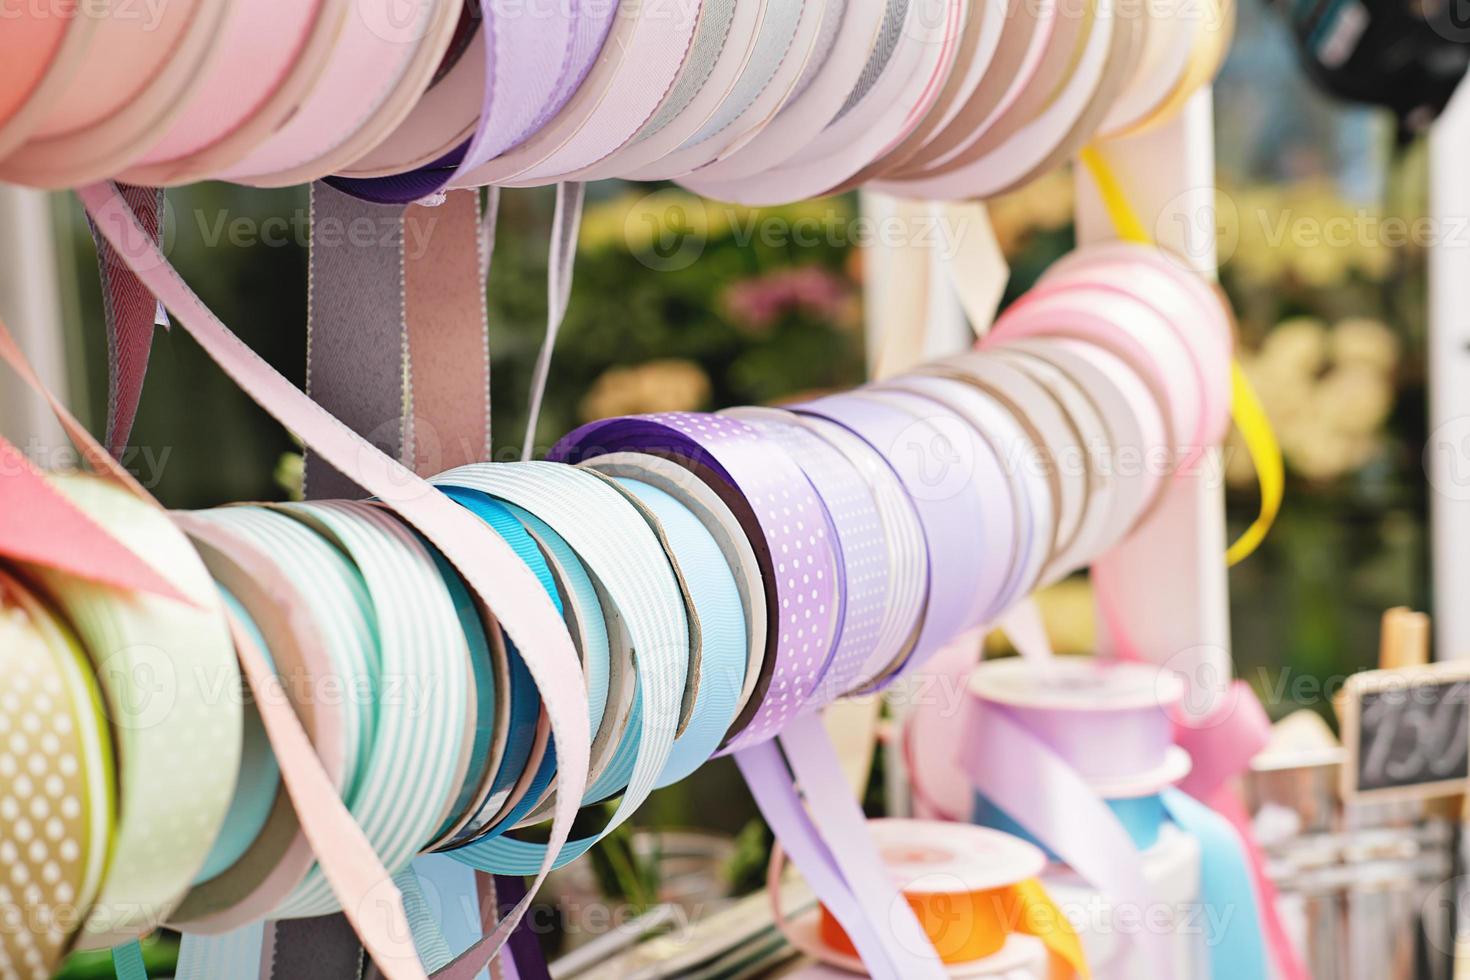 gift wrapping ribbons on a counter in a flower shop. various colors of ribbons for presents. gifts for holidays. small business, photo